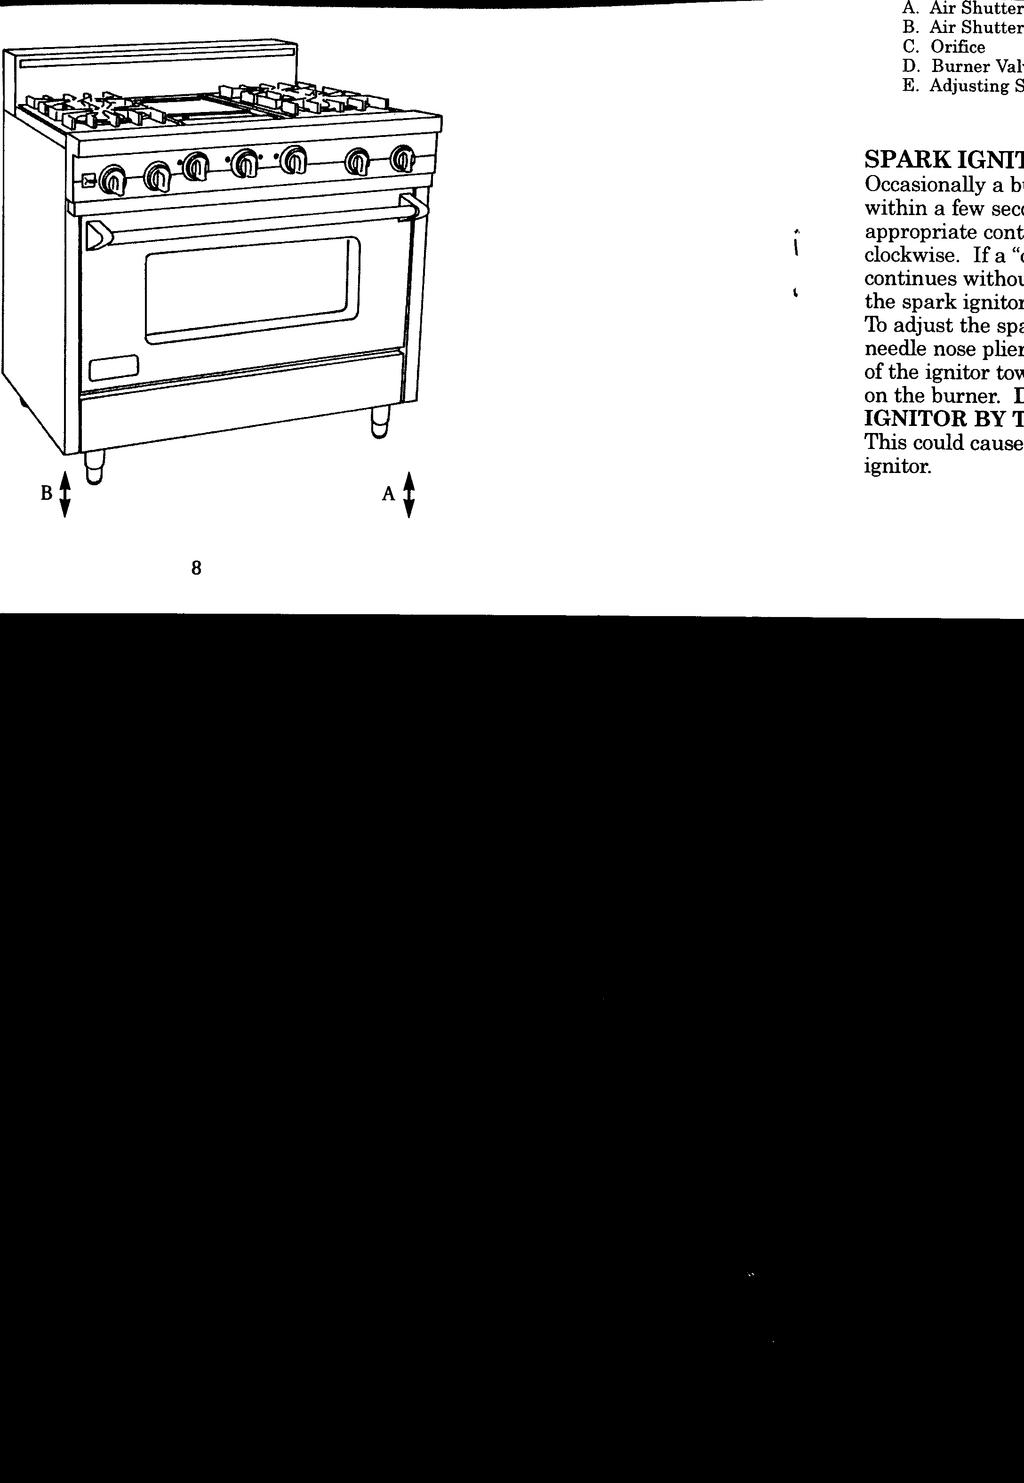 GENERAL INFORMATION 1. WARNING: The use of cabinets for storage above the appliance may result in a potential burn hazard. Combustible items may ignite, metallic items may become hot and cause burns.